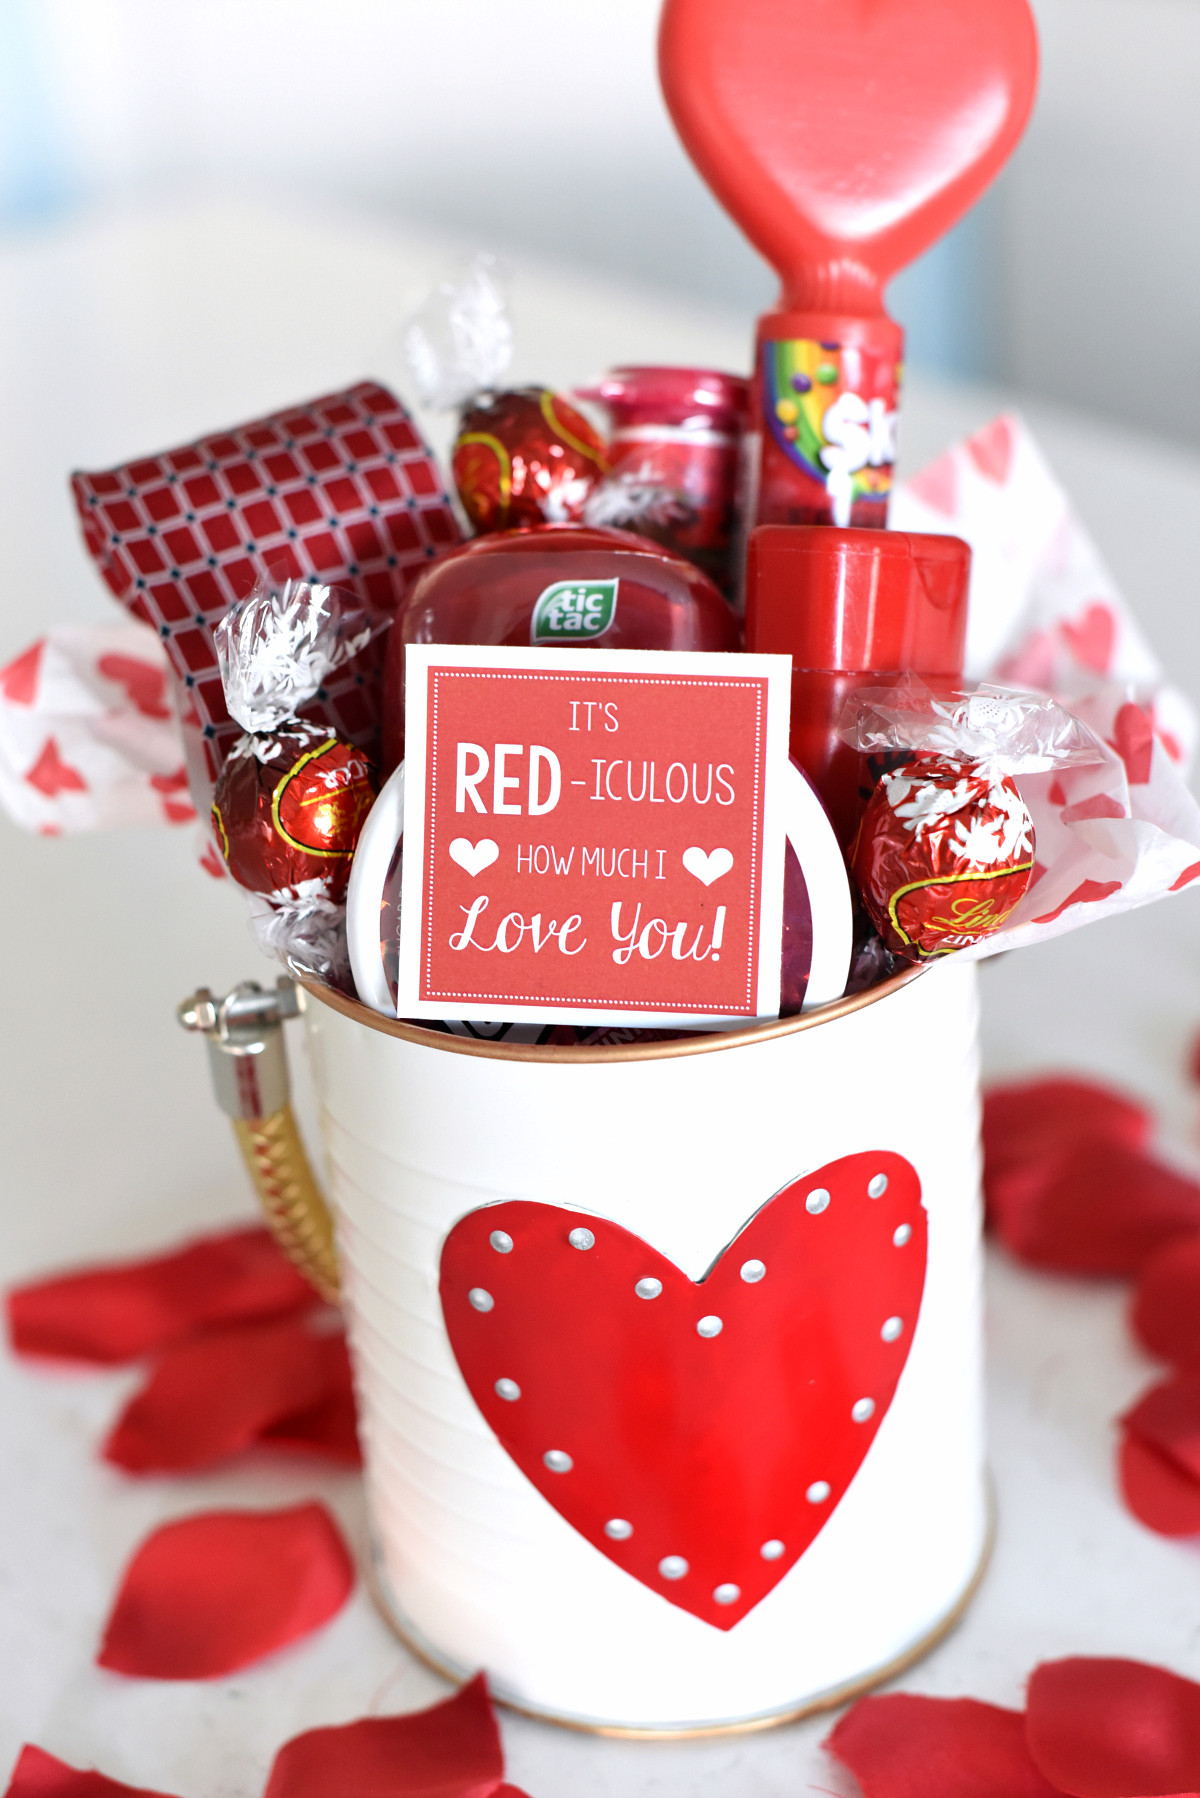 Unique Valentines Day Gift Ideas For Him
 Cute Valentine s Day Gift Idea RED iculous Basket